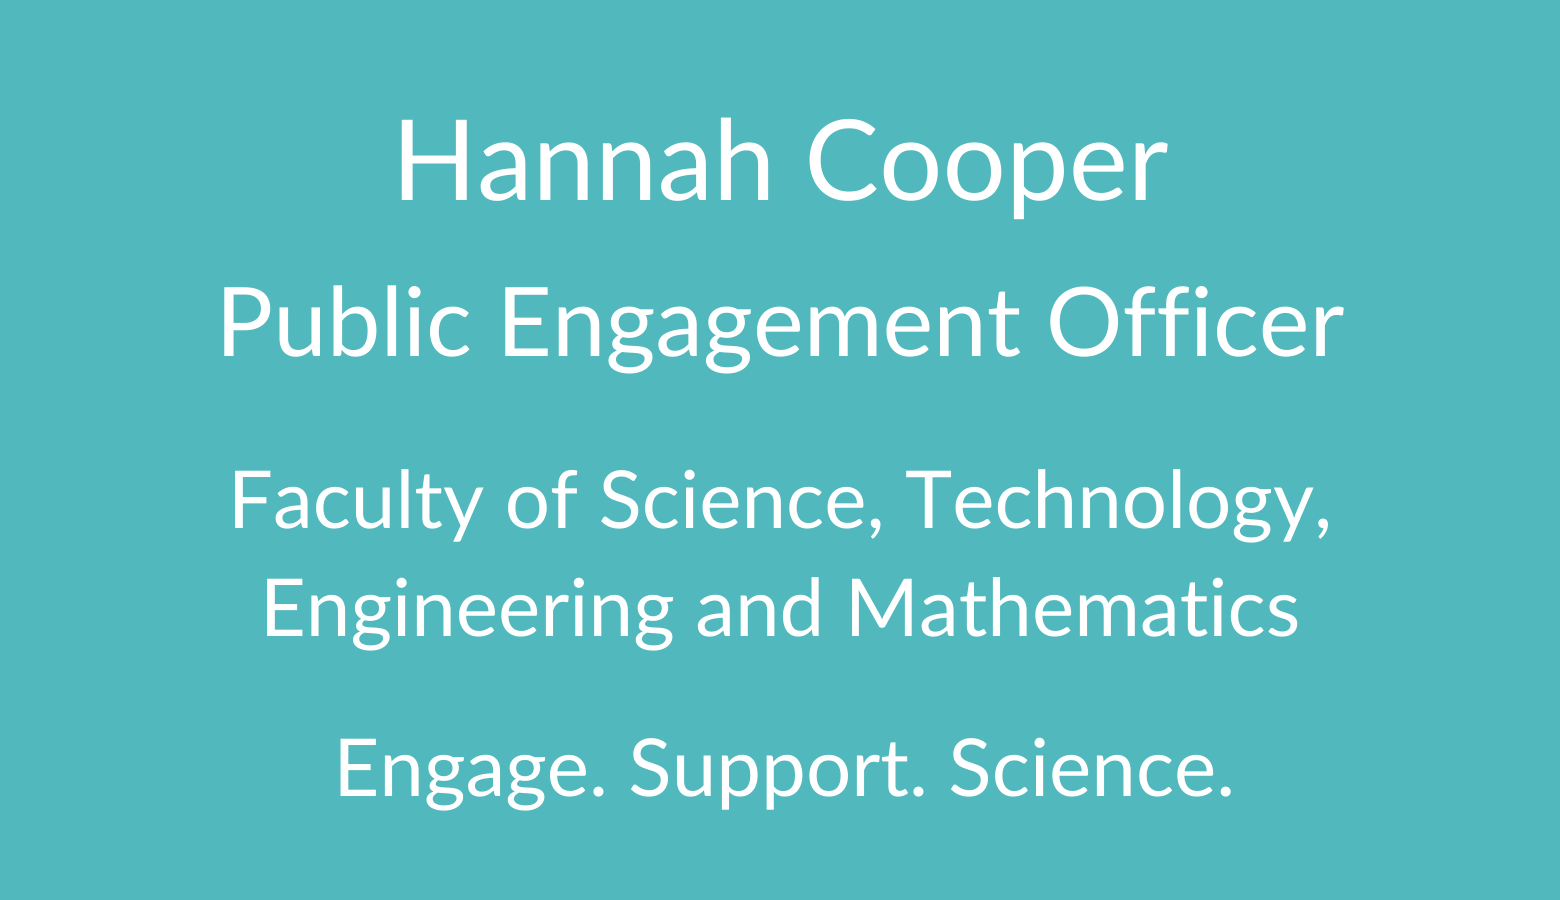 Hannah Cooper. Public Engagement Officer. Faculty of Science. Technology, Engineering and Mathematics. Engage. Support. Science.